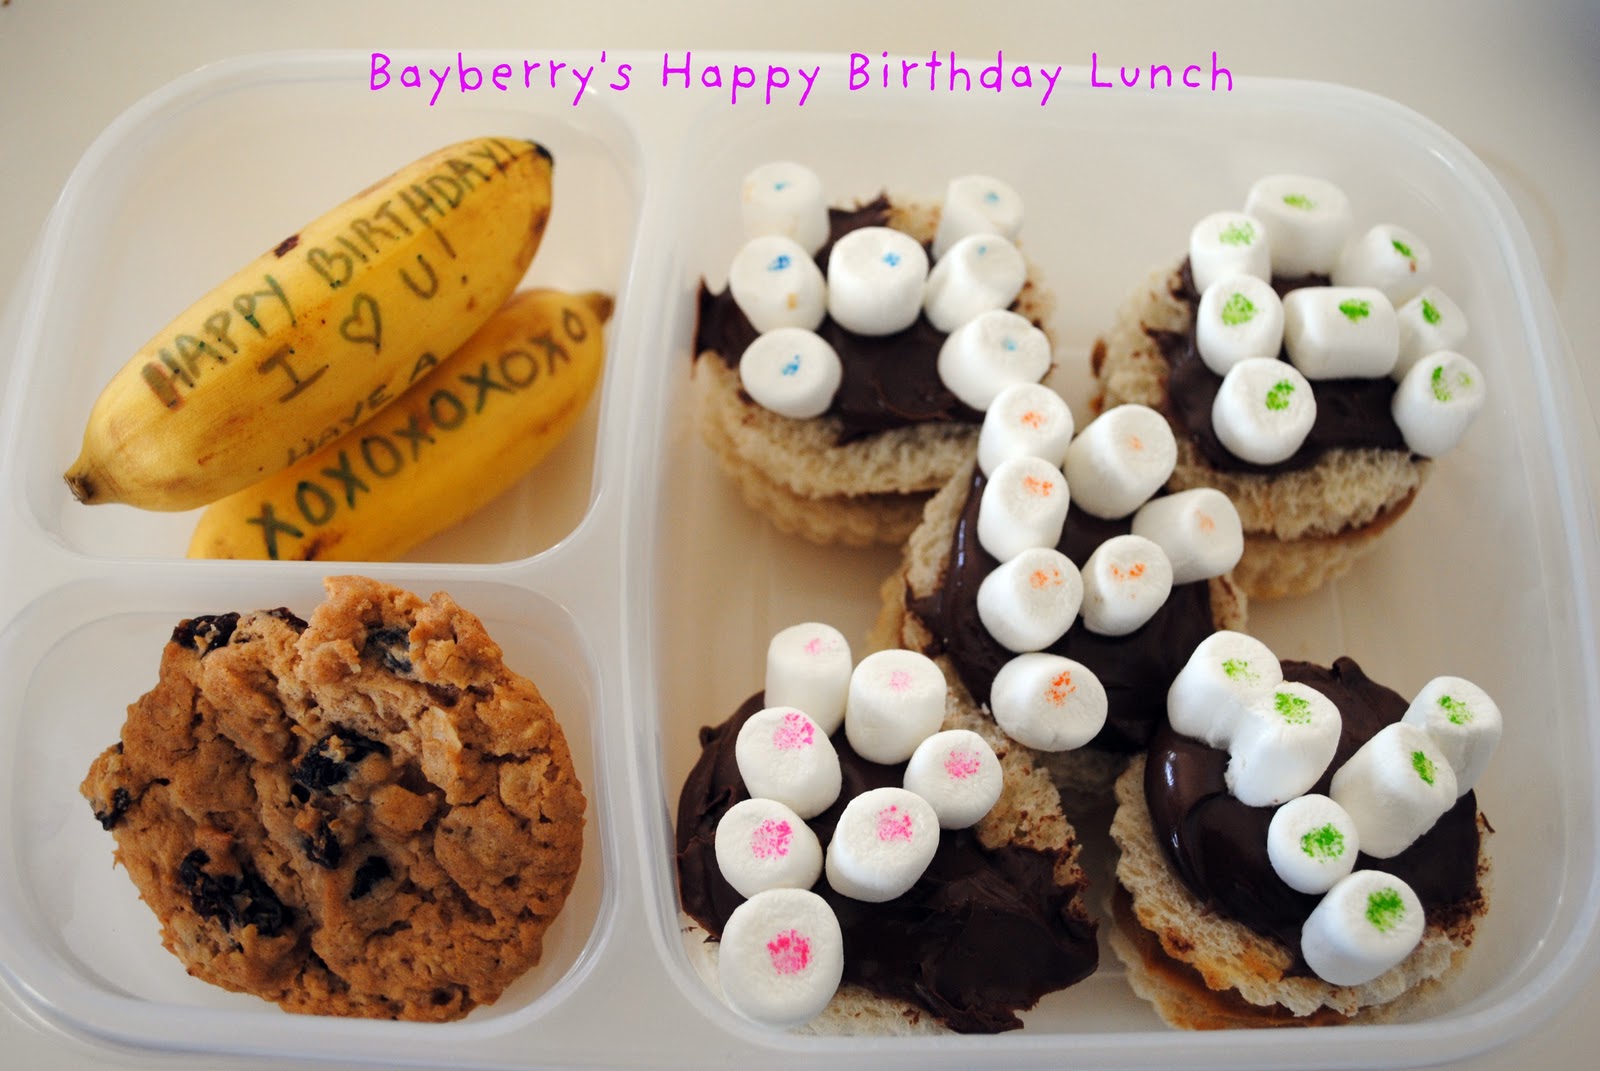 360 Lunch Boxes: Saturday is Bayberry's Birthday